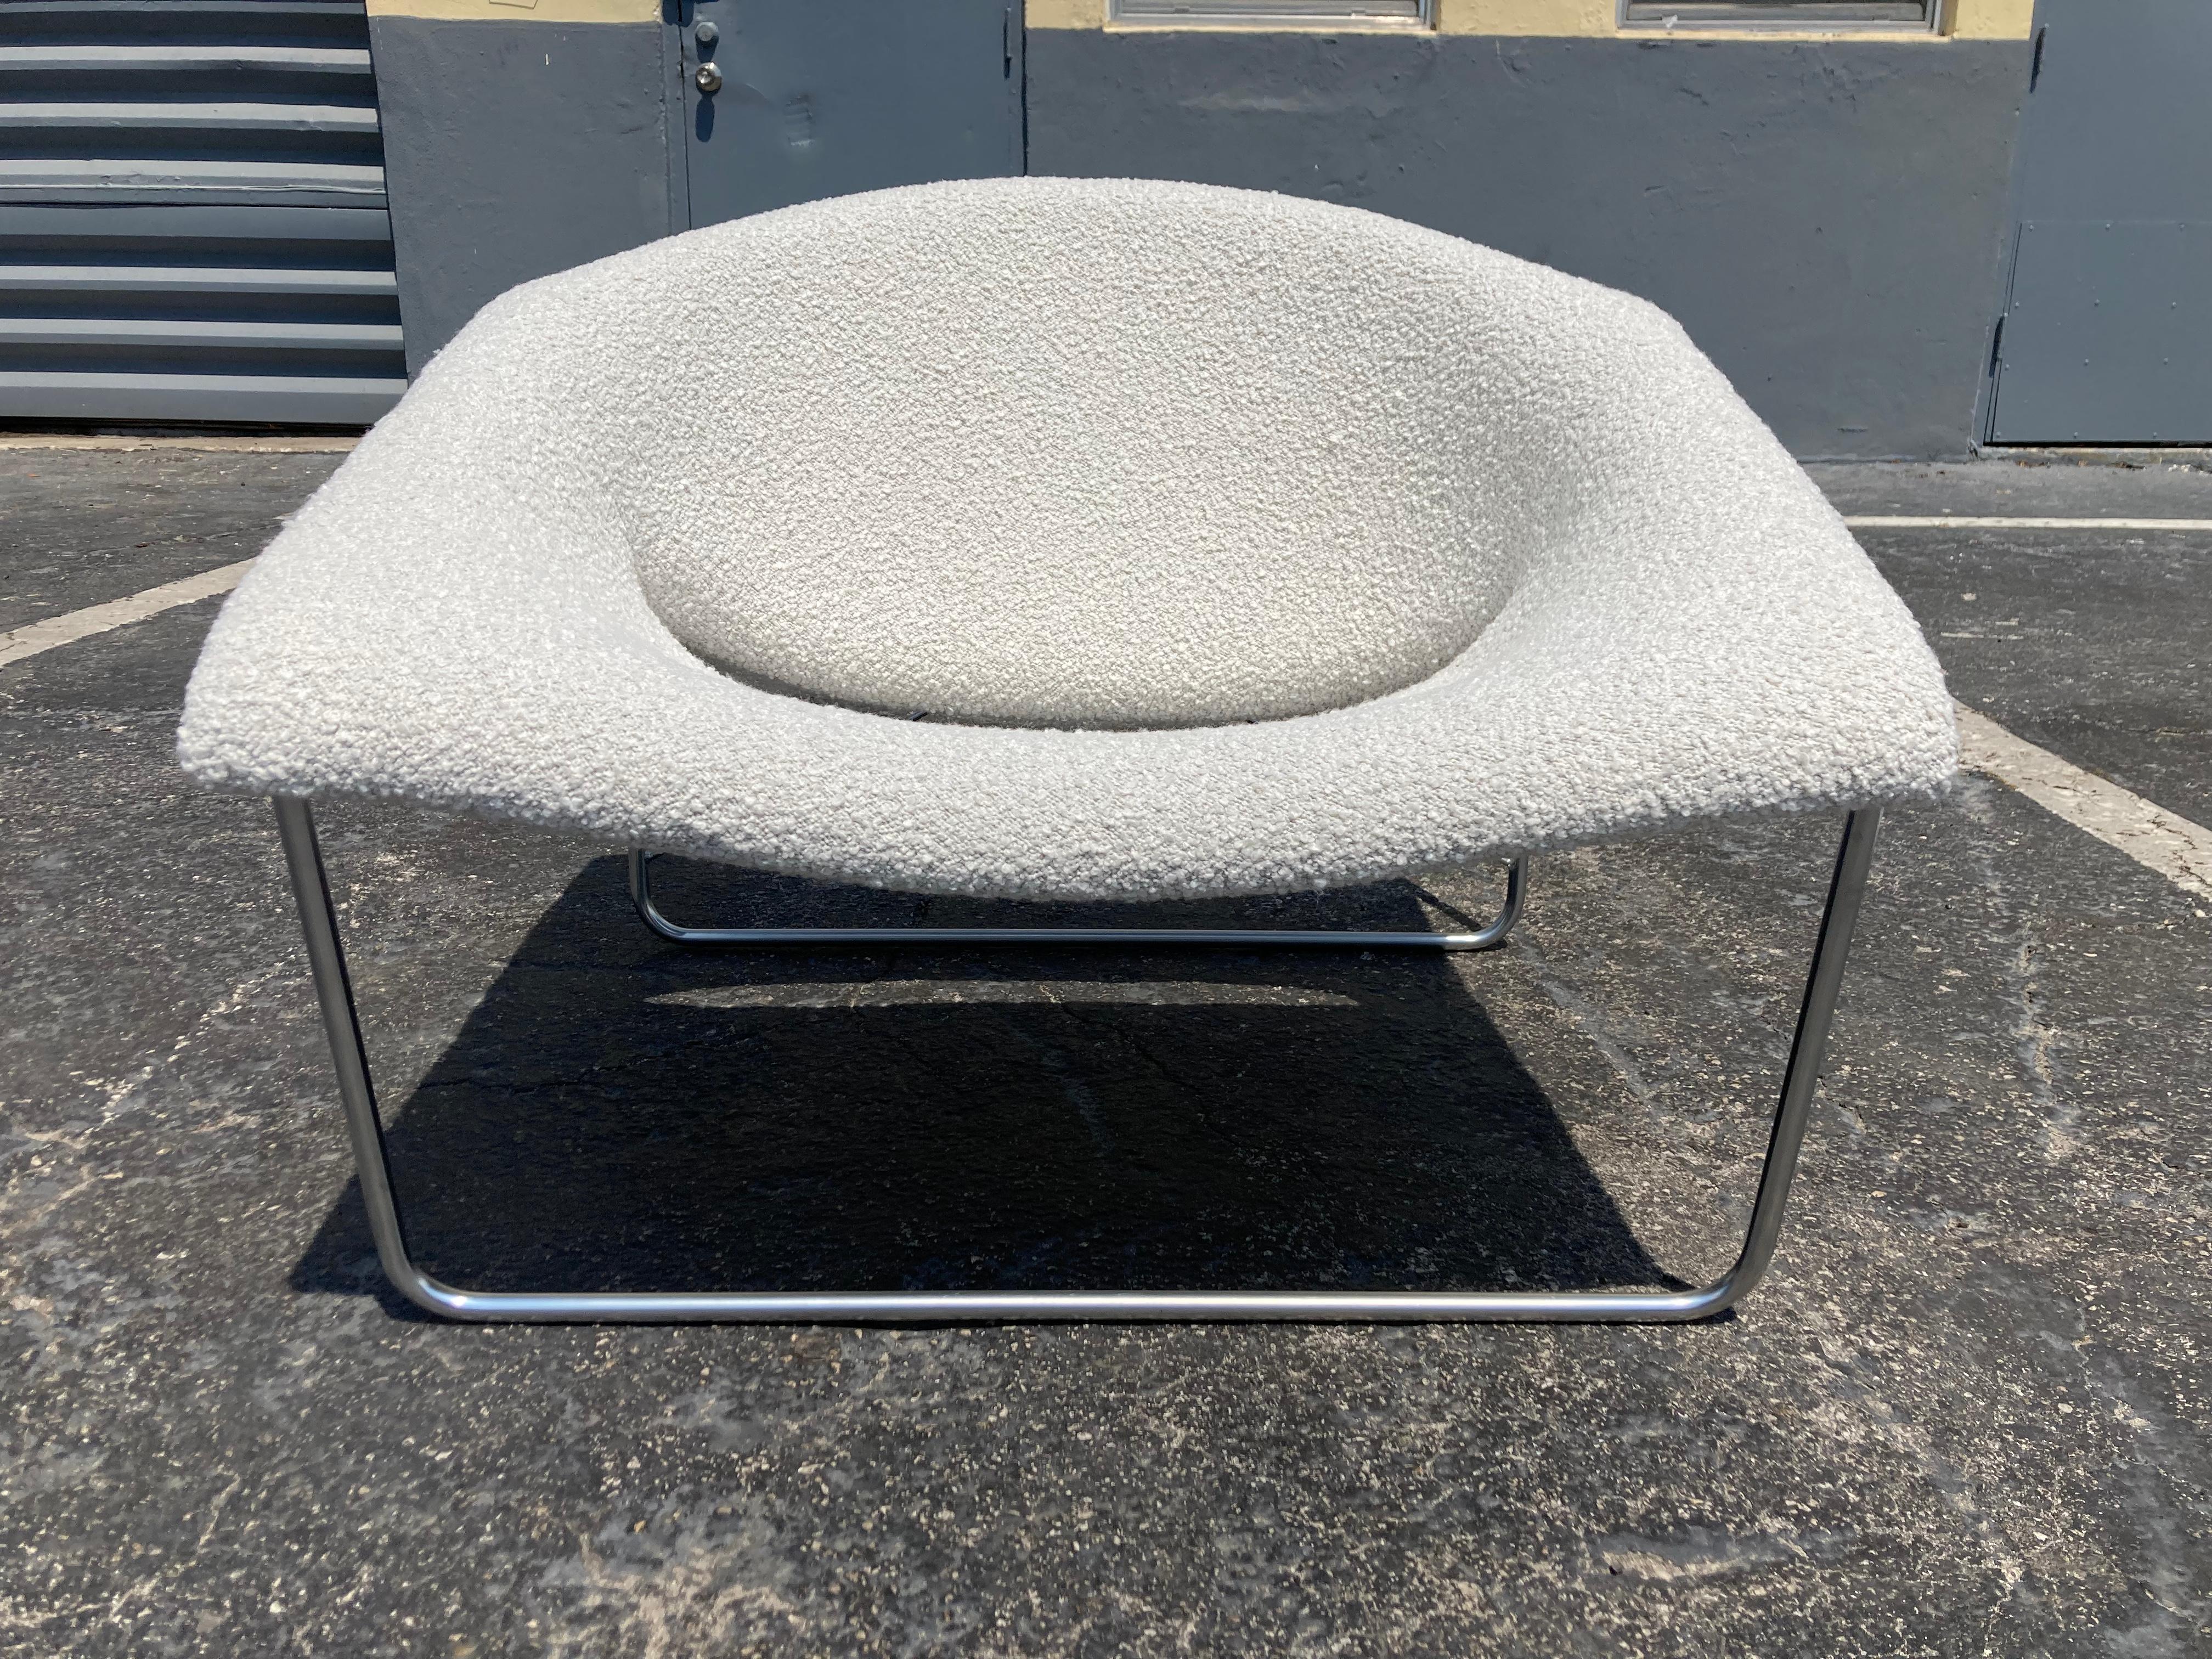 Iconic 'Cubique' chair designed by Olivier Mourgue for Airborne International, France. Chromed tubular steel, fiberglass body with foam and new boucle fabric. Ready for a new home.